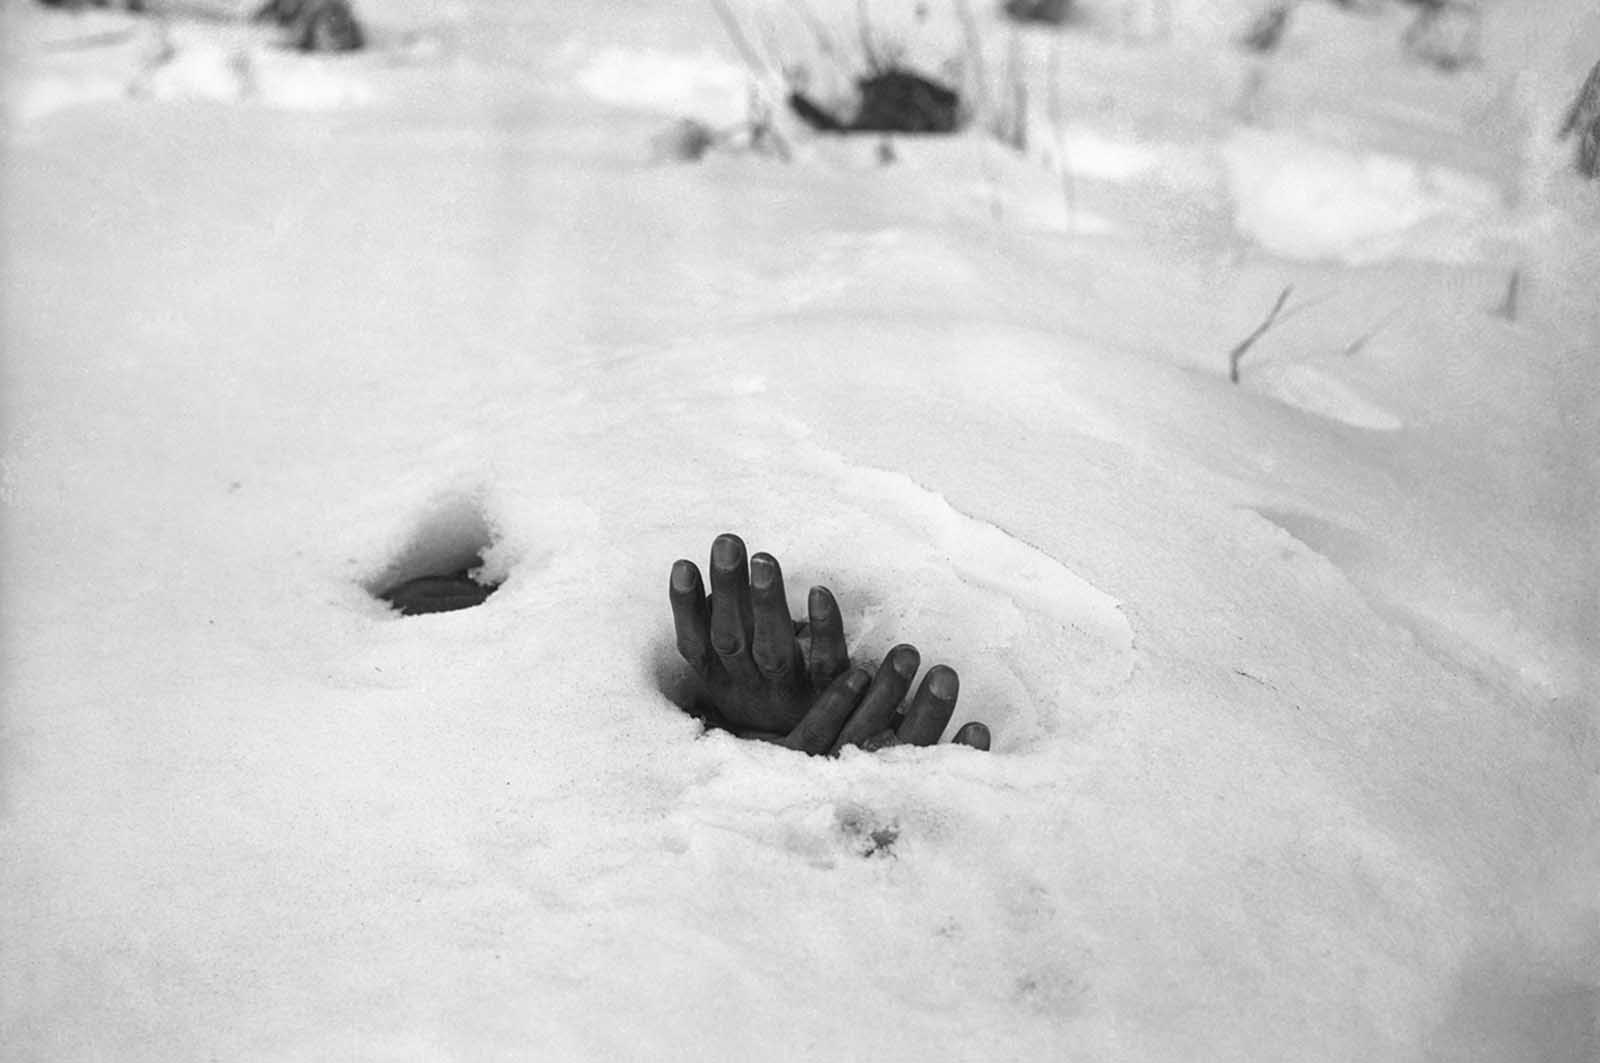 A pair of bound hands and a breathing hole in the snow at Yangji, Korea, January 27, 1951 reveal the presence of the body of a Korean civilian shot and left to die by retreating Communists during the Korean War.